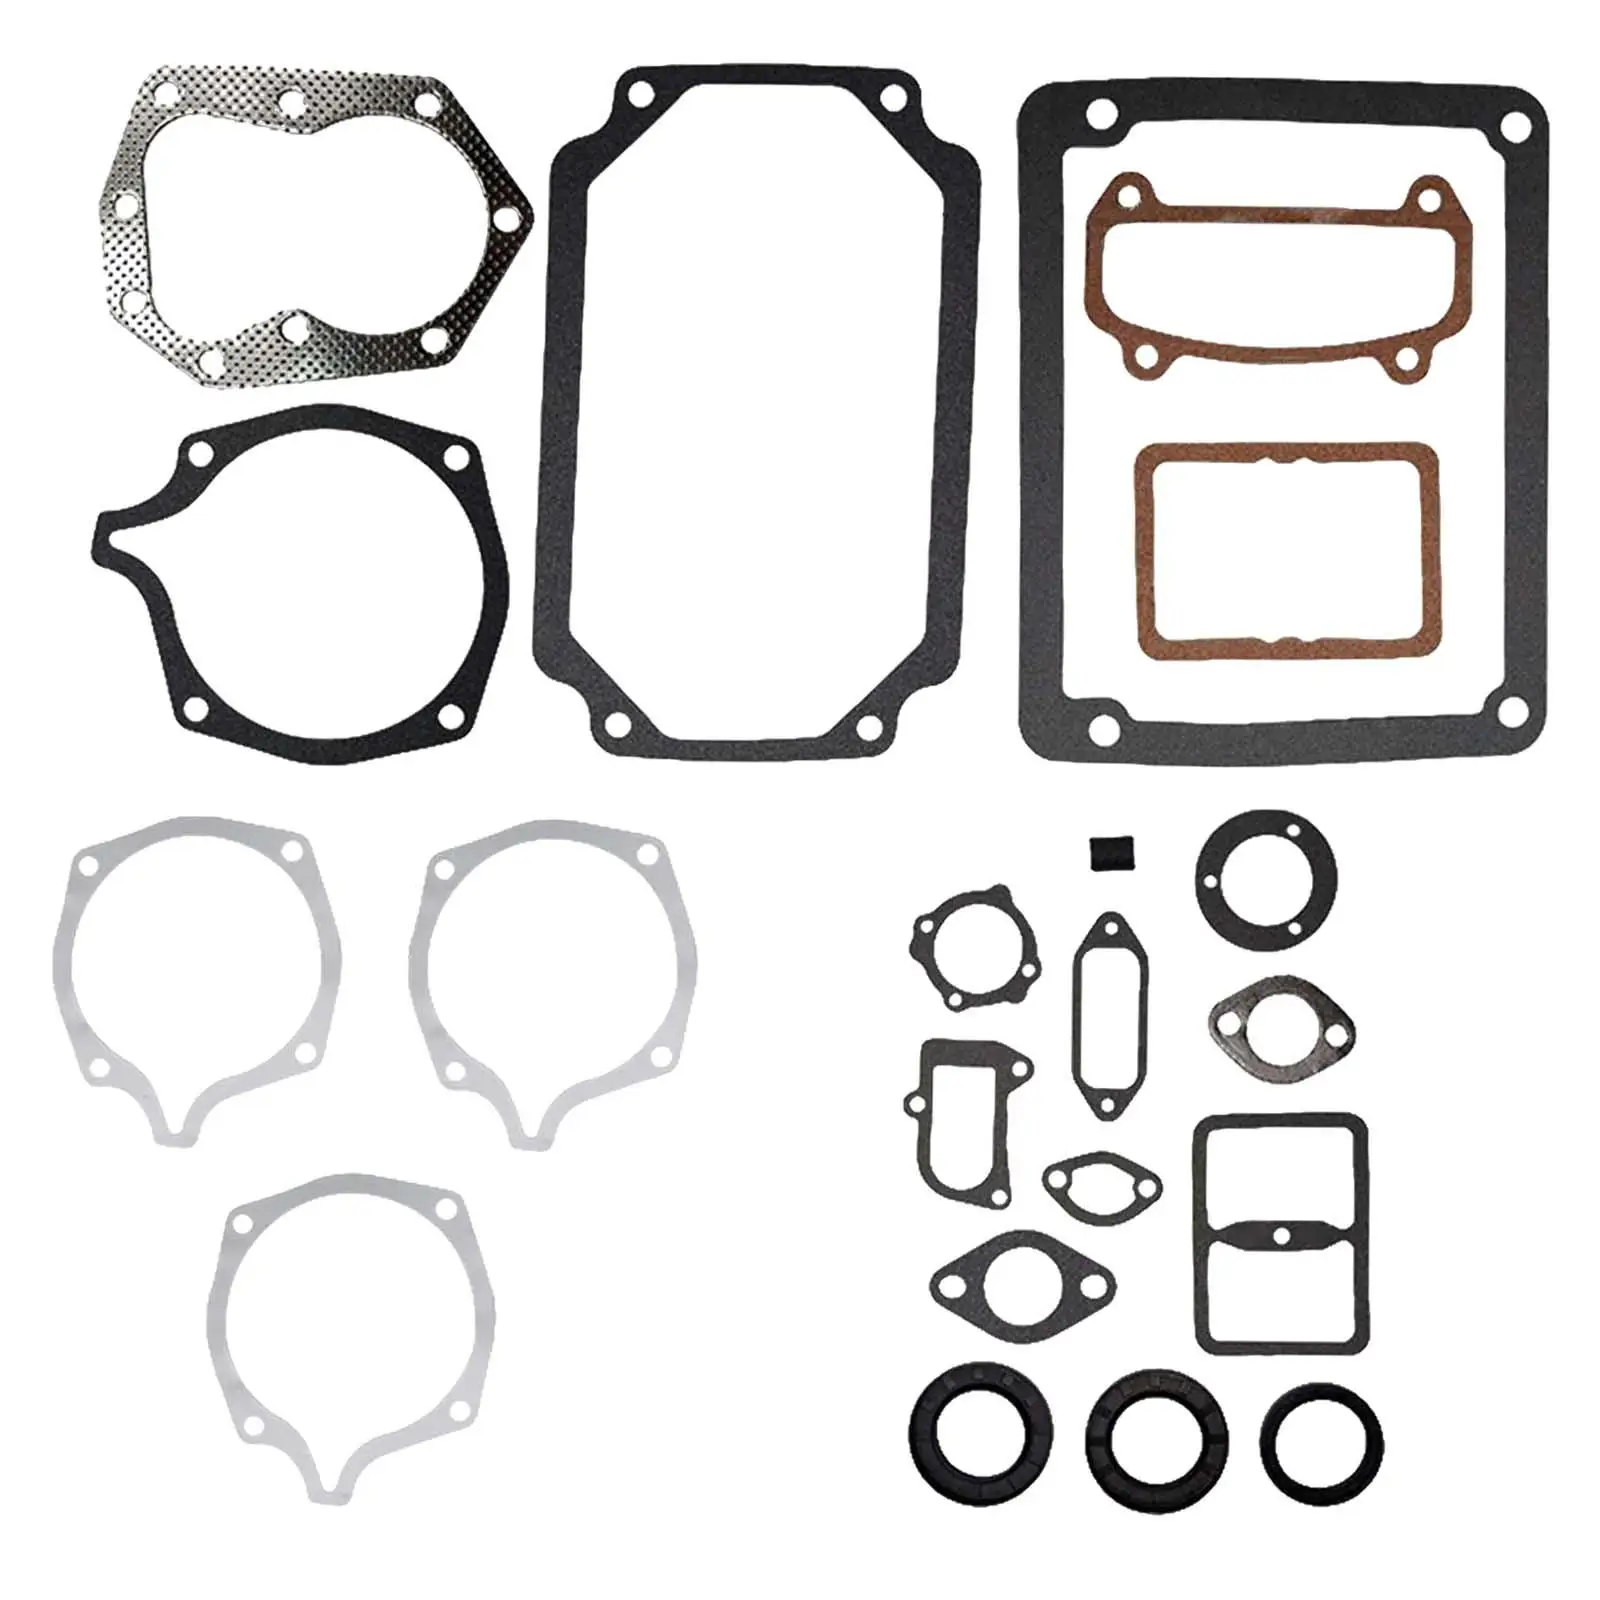 47 755 08-S Gasket Set Silver Metal and Plastic Accessories Fits for K241 K301